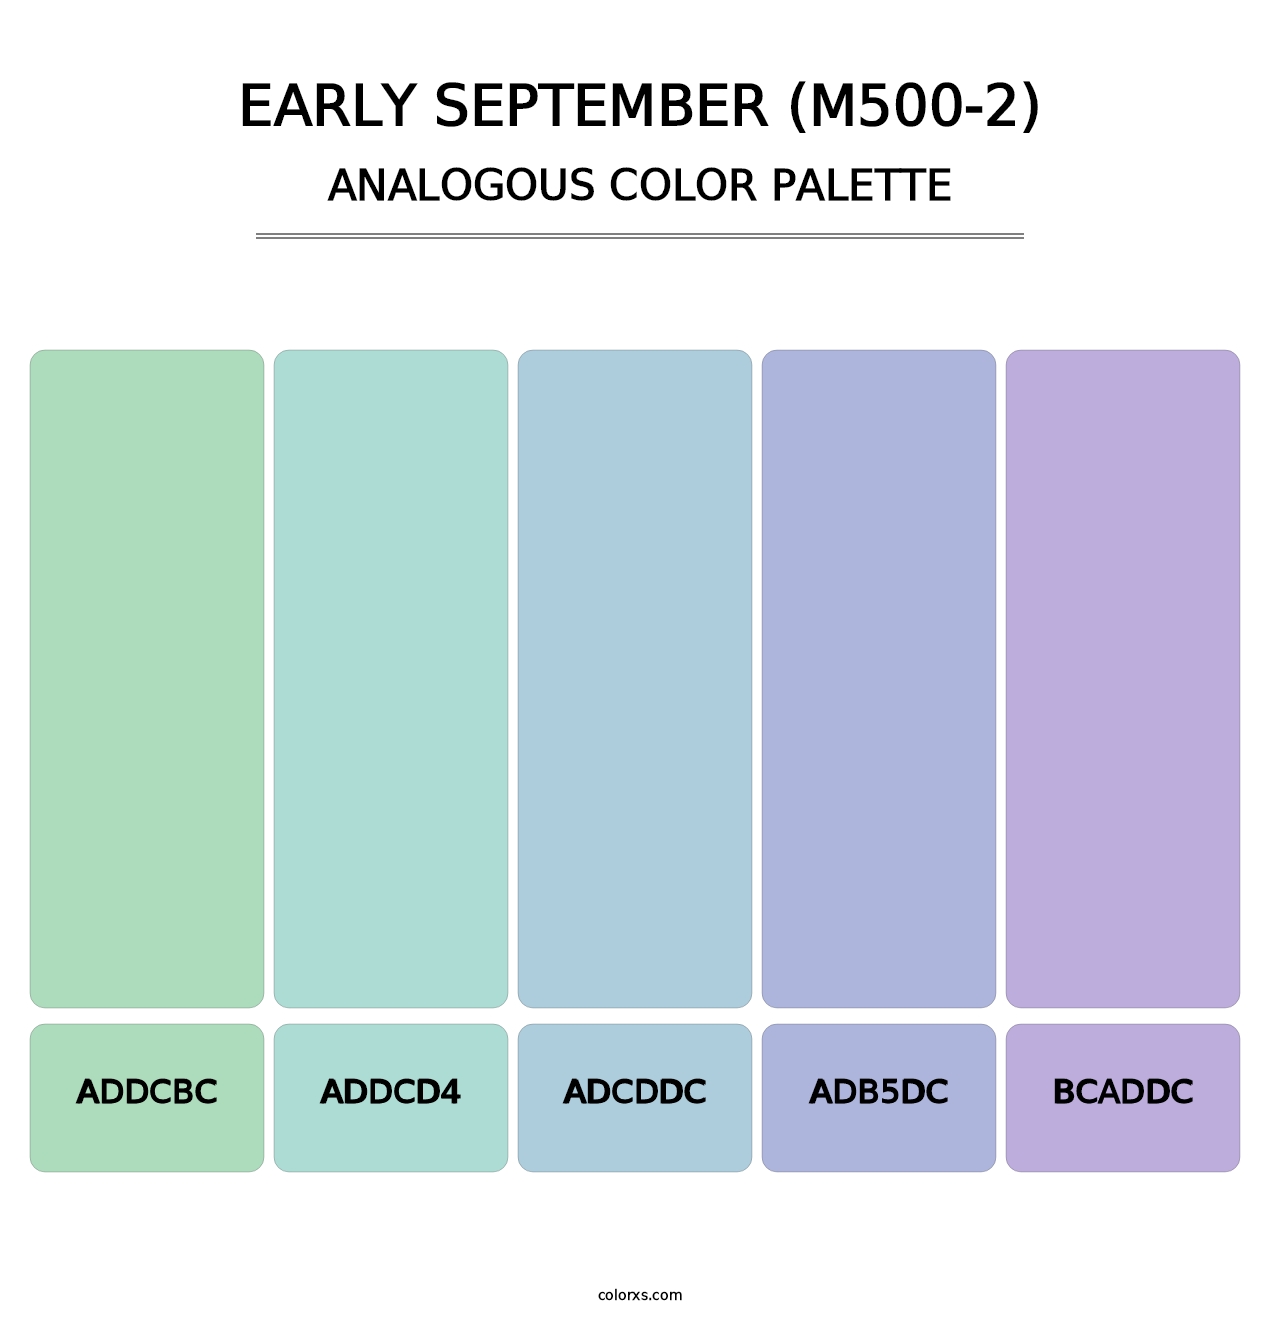 Early September (M500-2) - Analogous Color Palette